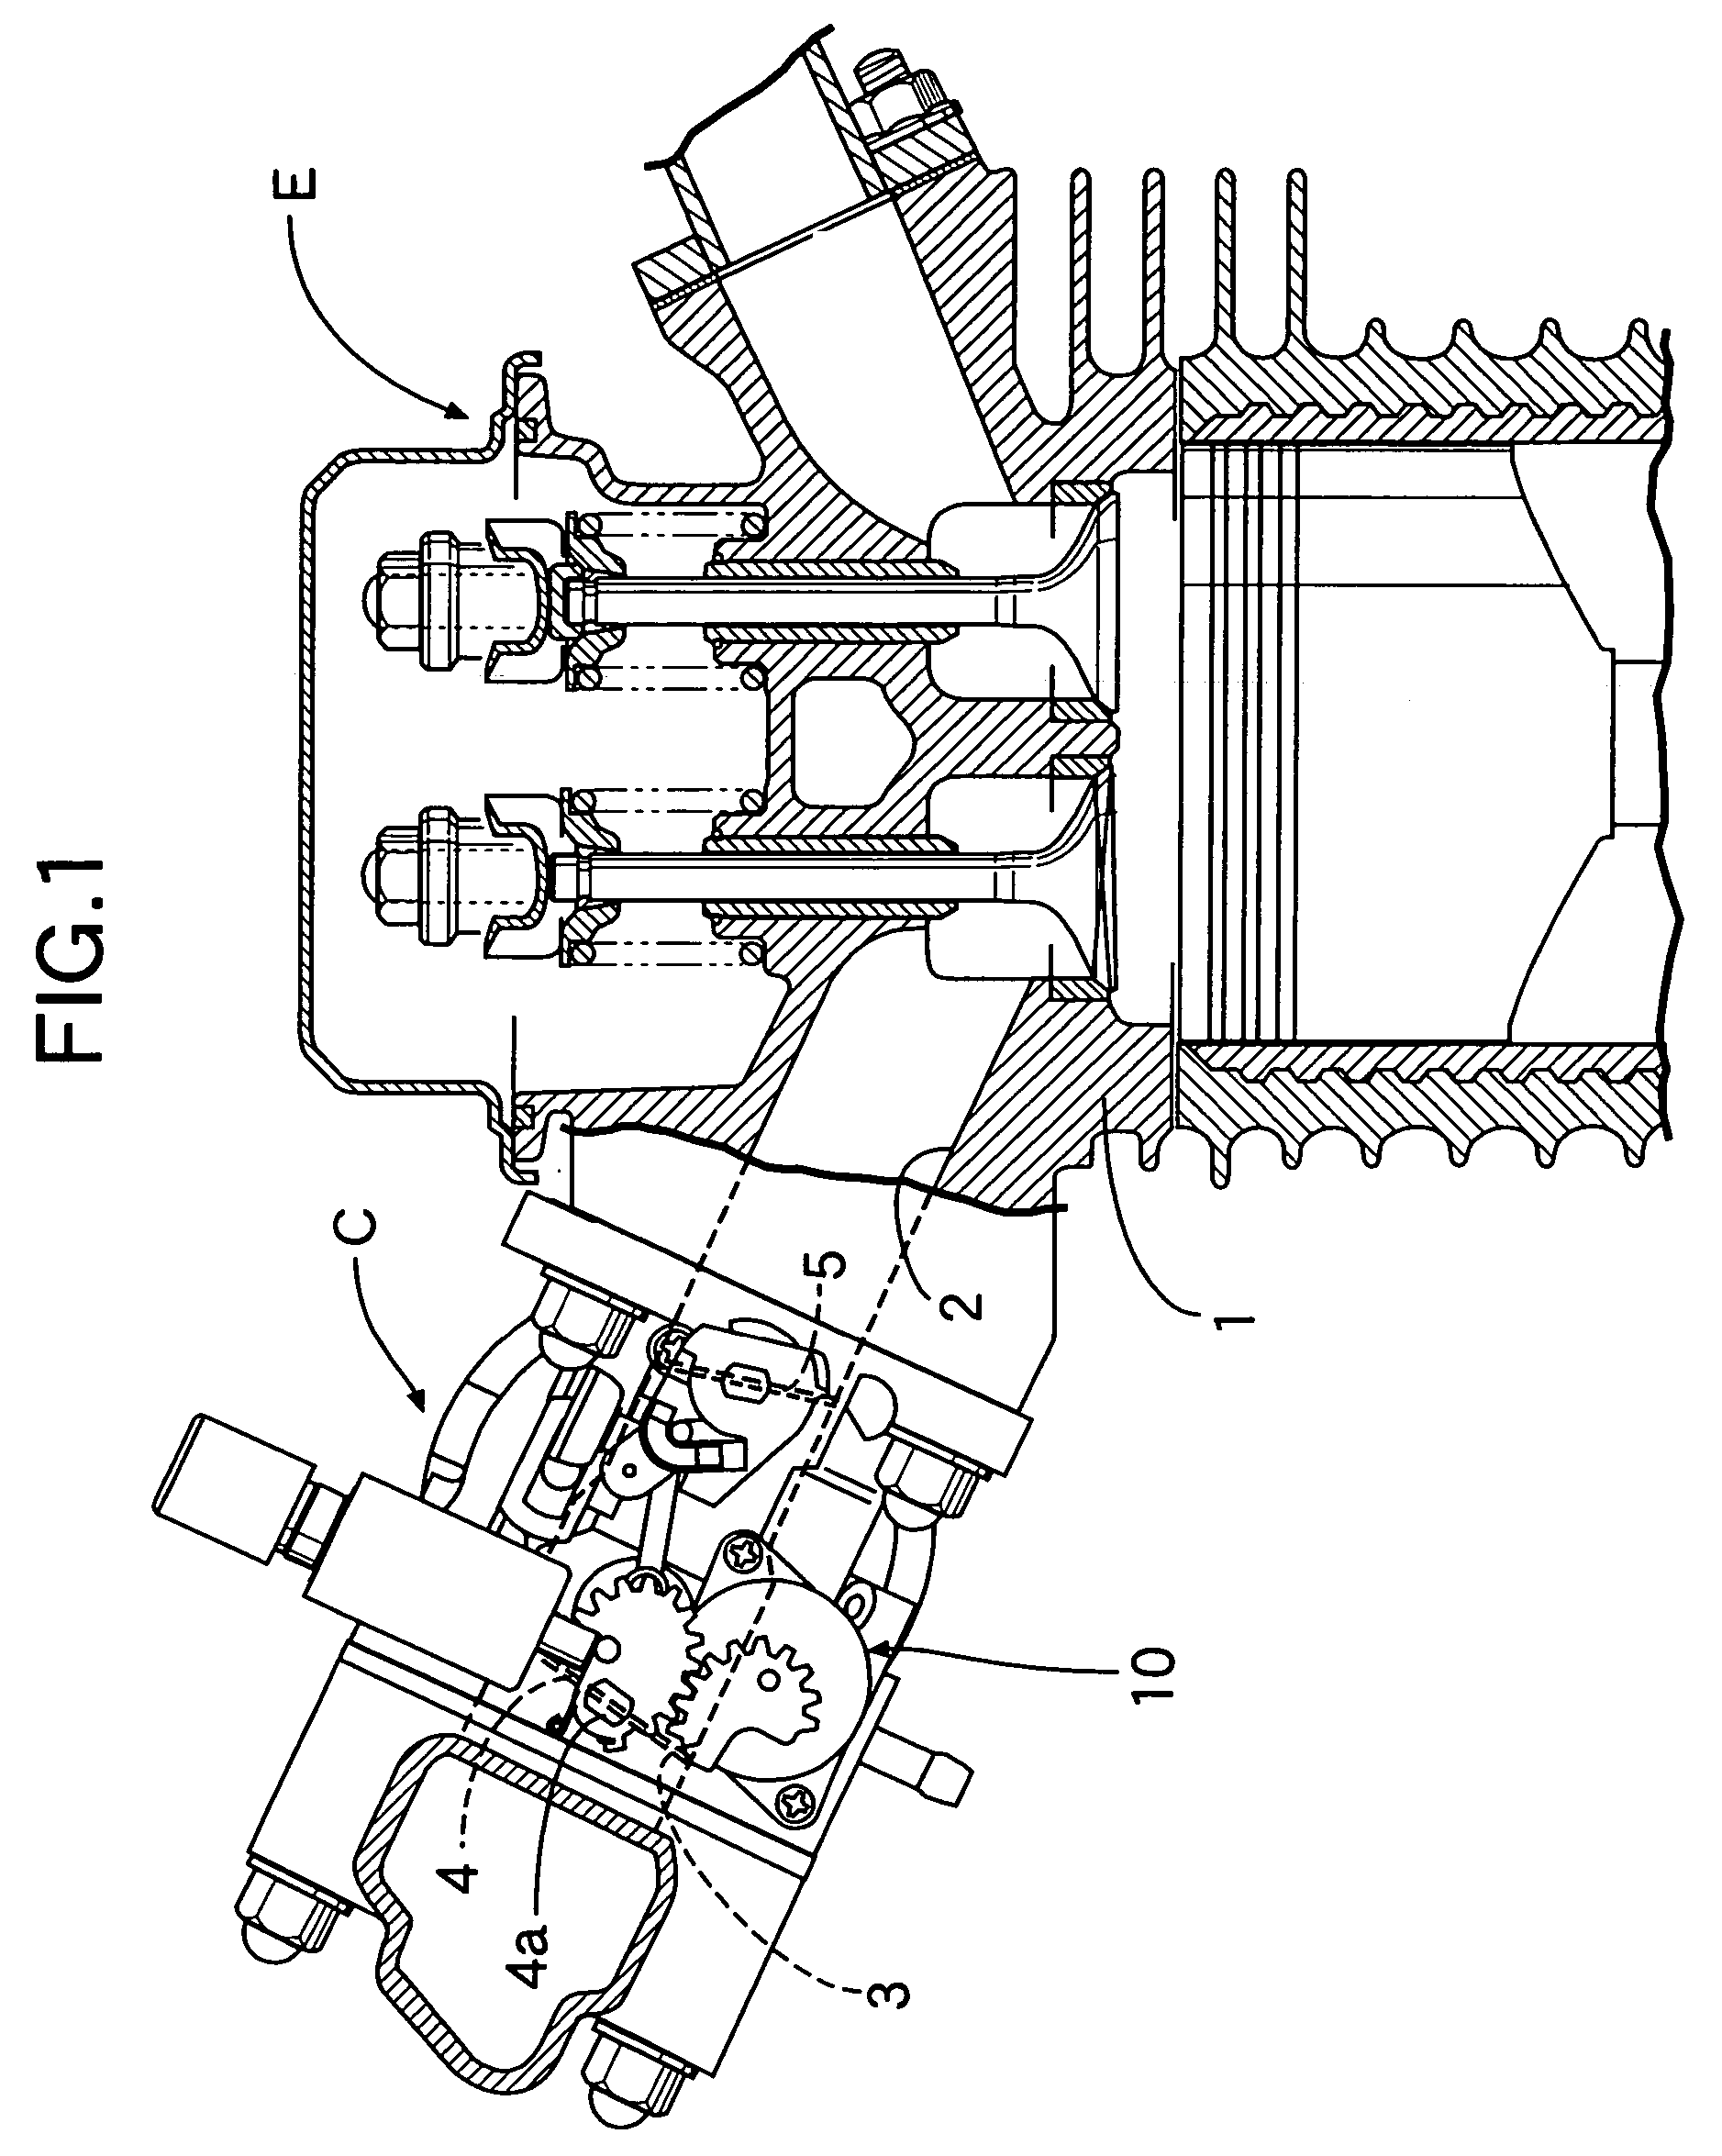 Carburetor electrically-operated automatic choke system